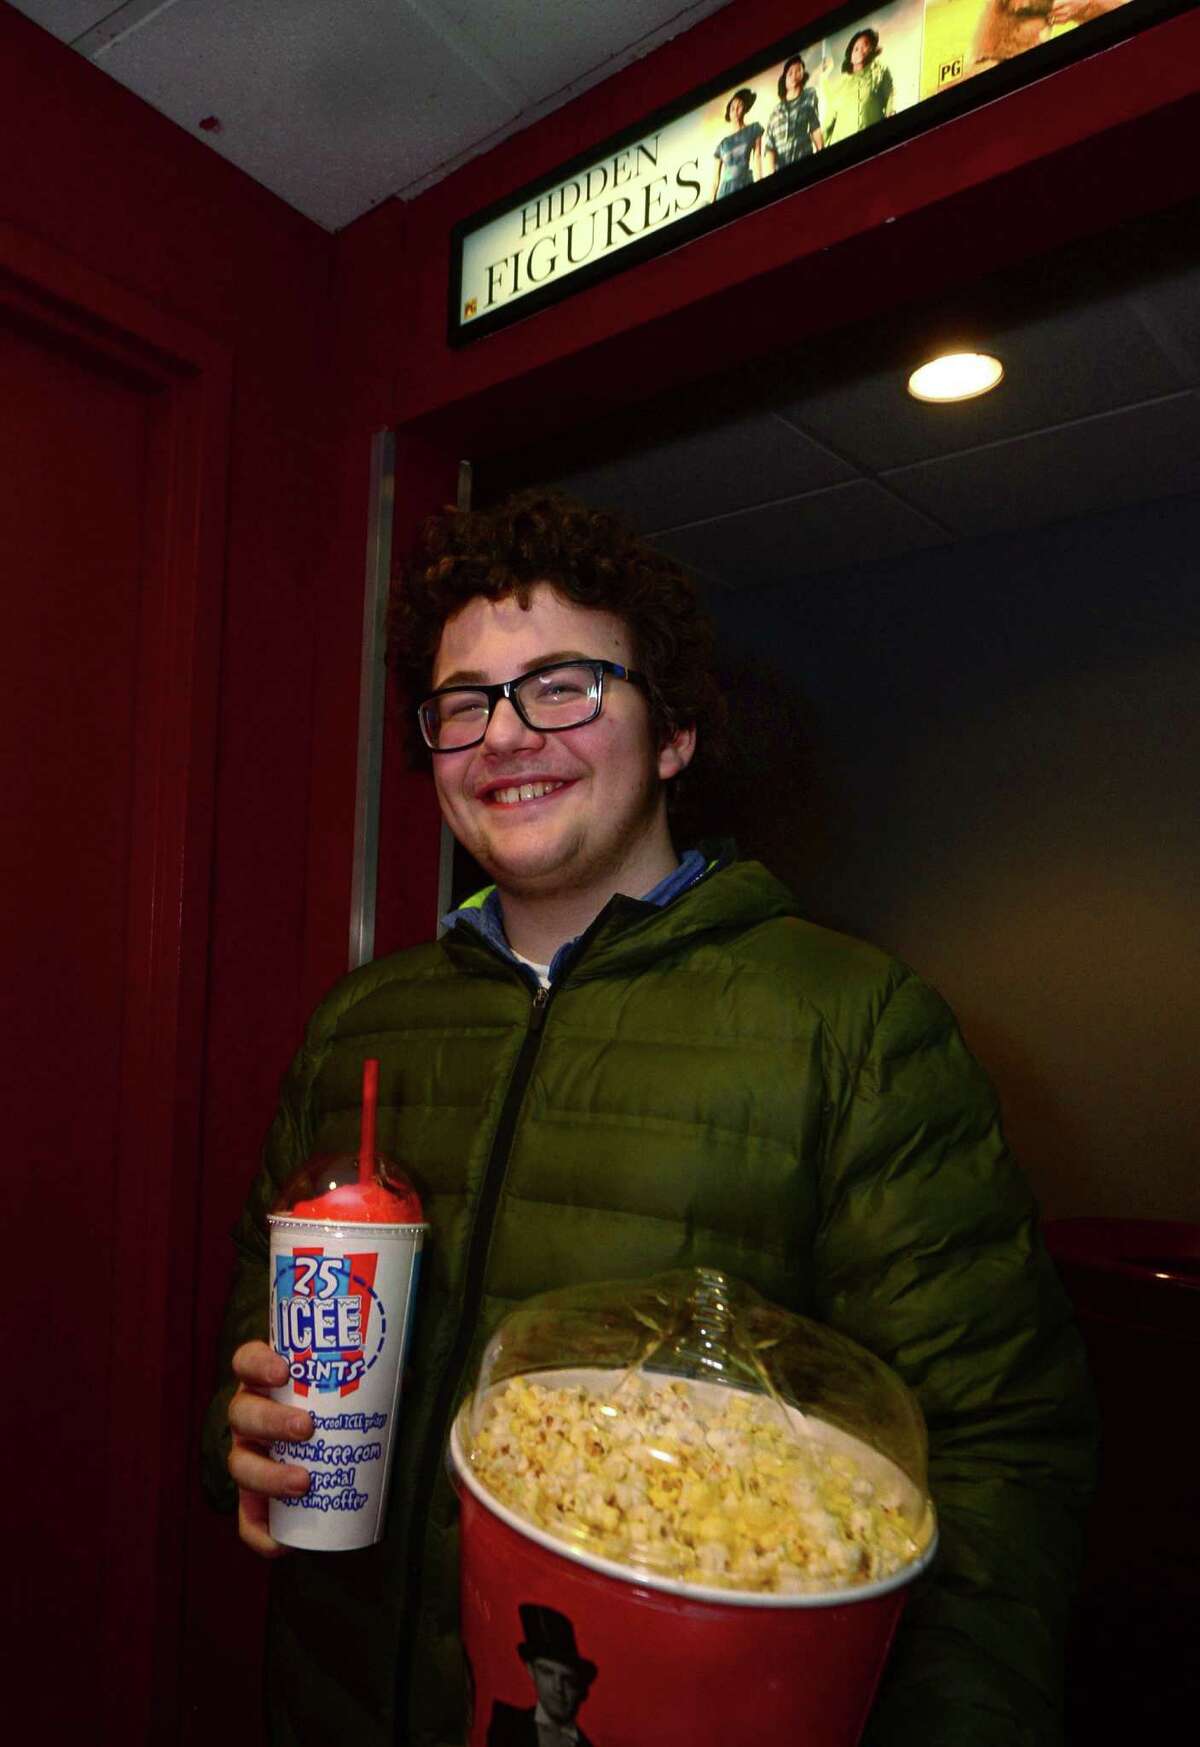 Eighth grader Donny Defala is prepared with popcorn and a drink as a group of nearly 200 students and more than 20 adults from Nathan Hale Middle School take a trip to the movies Friday morning, January 27, 2017, for a special screening of ?“Hidden Figures?”, a movie that has drawn critical acclaim for its depiction of the African-American mathematicians who provided NASA with important data needed to launch the program's first successful space missions, at the Bow Tie Regen in South Norwalk, Conn. The trip was originally going to be used as an incentive to students, but after further reflection of ?“the importance of the subject matter and message,?” school officials decided that the entire eighth grade should have the opportunity to see the film.